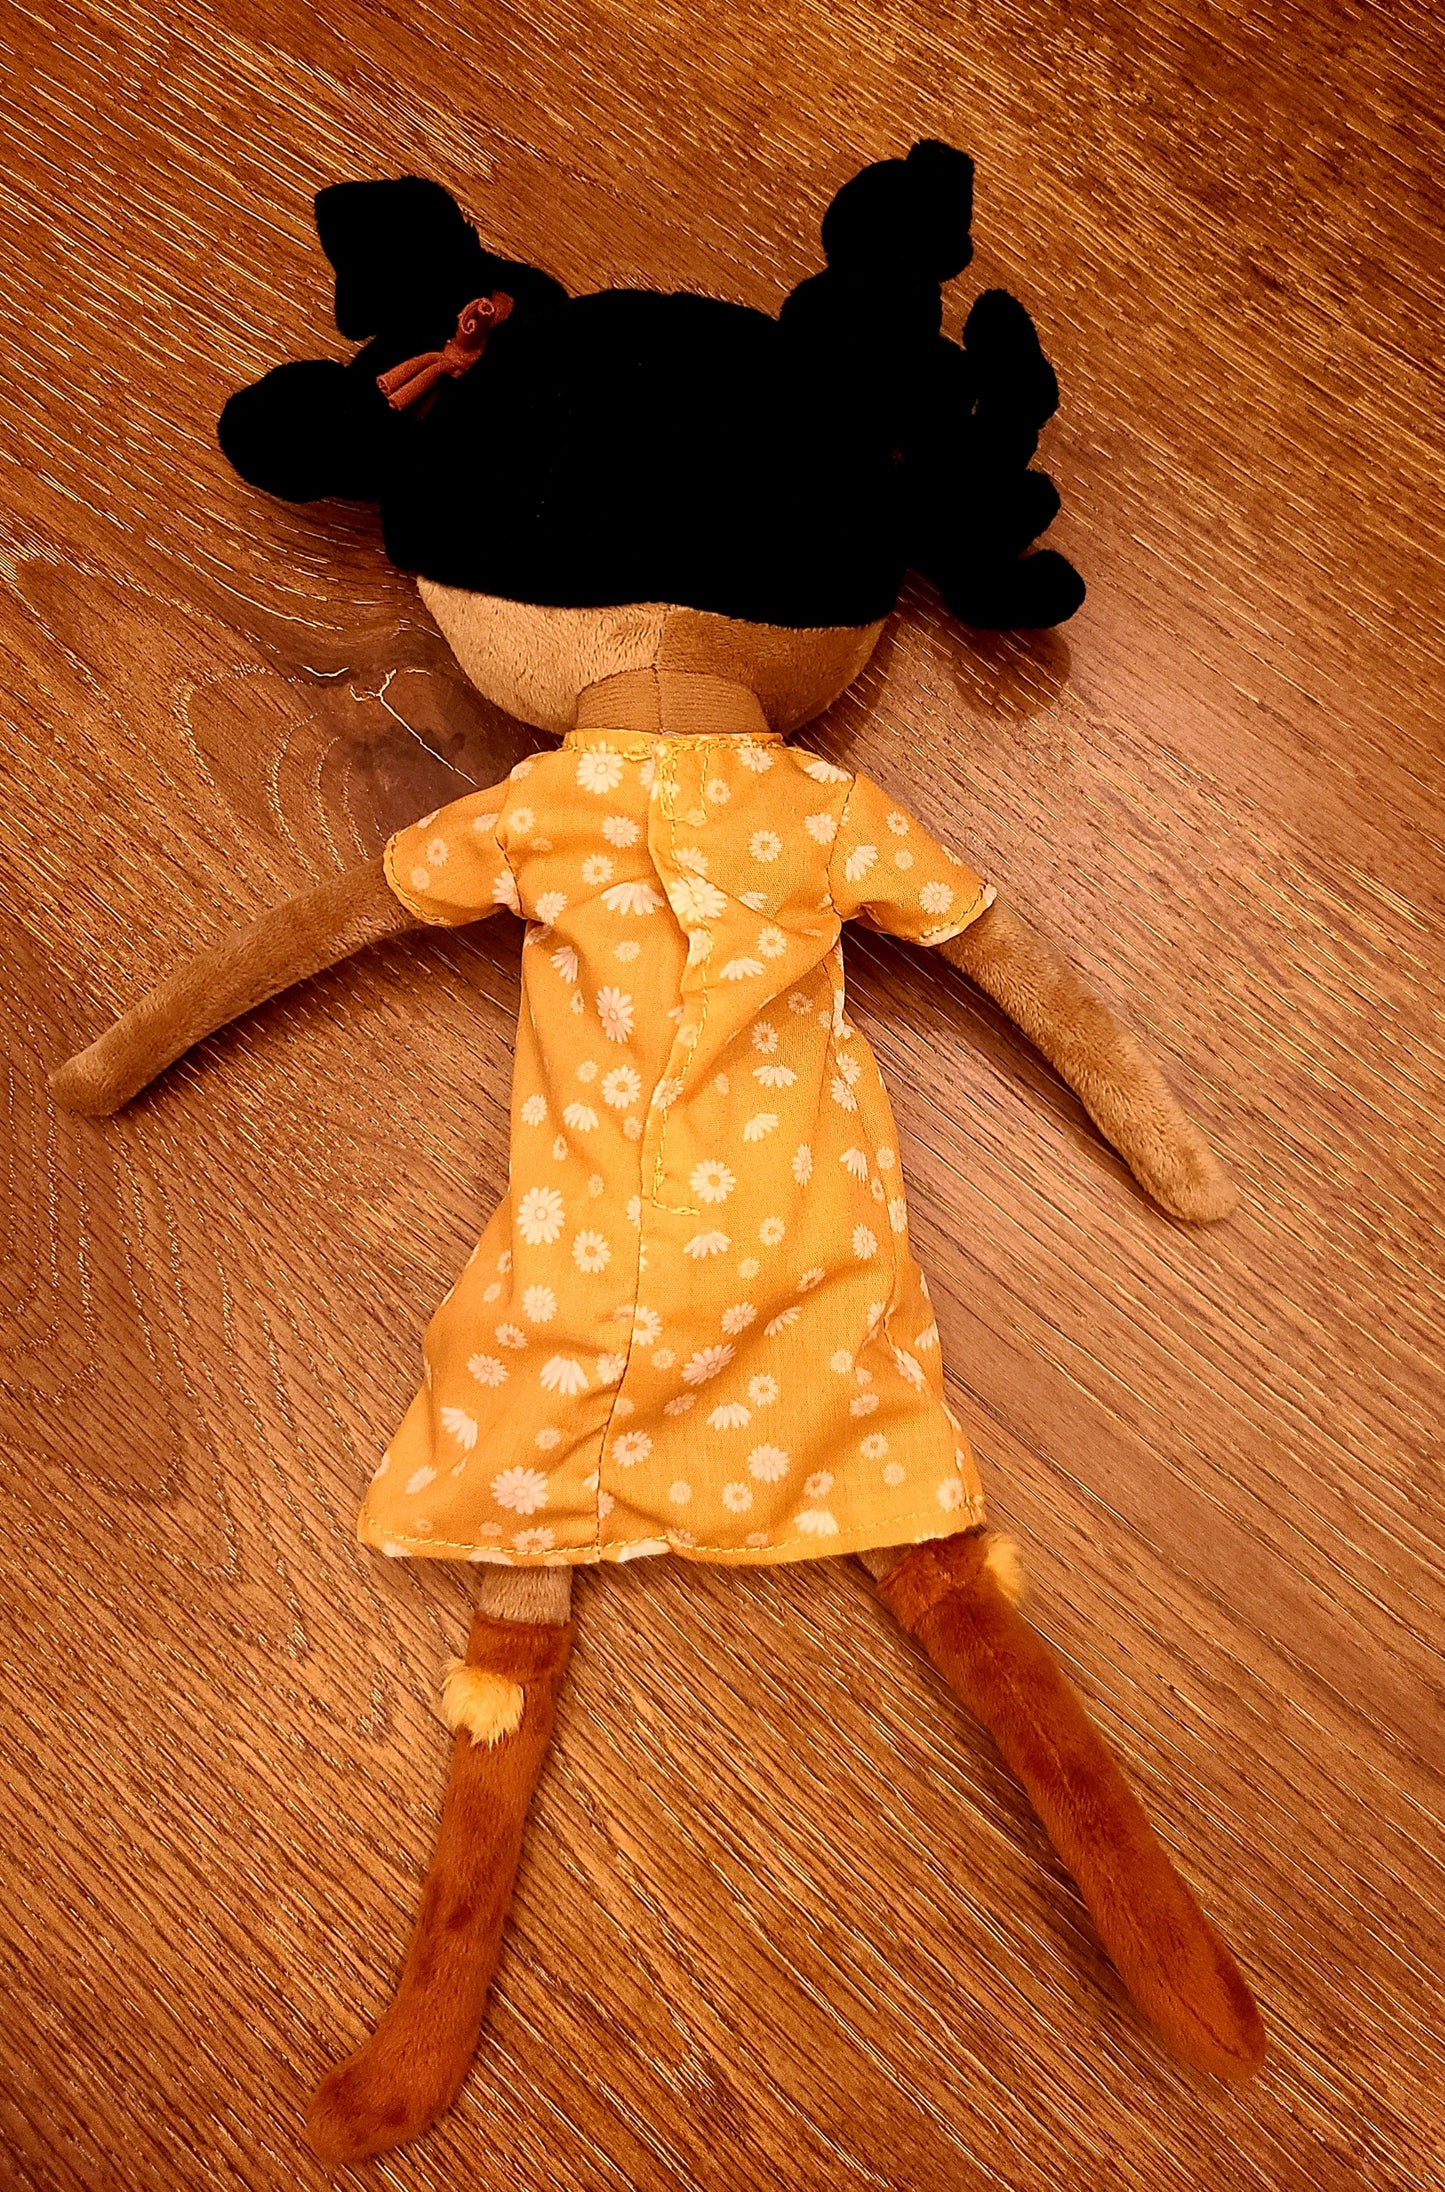 Personalized Evi Soft Rag 13" Brown Girl Plush Doll With Mustard Flower Dress/ Baby Gift Toy